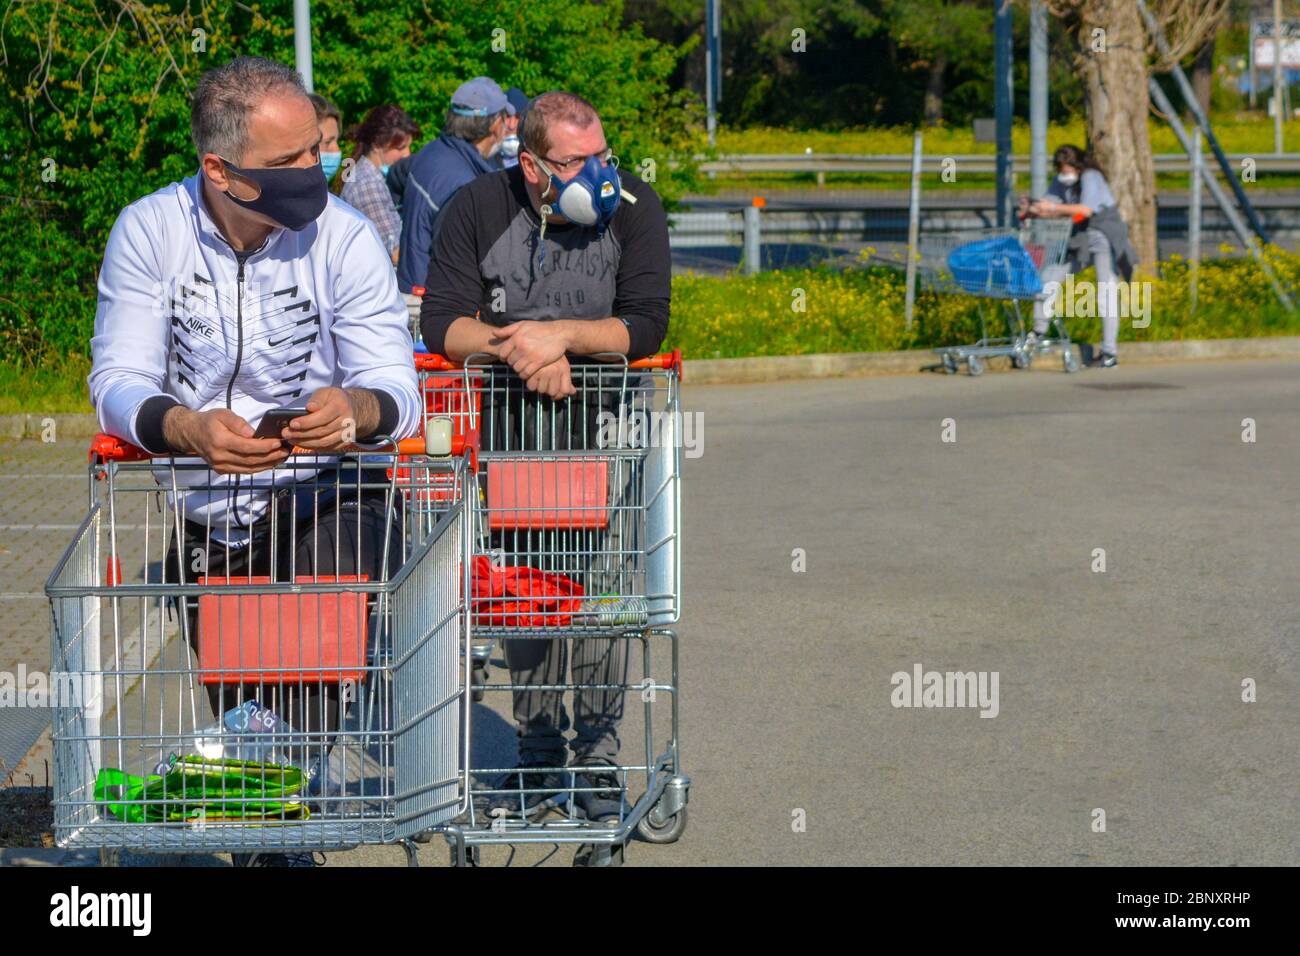 Toscana, Italy 04/08/20 - Closeup of group of patient italian white men and women wearing COVID-19 protection masks. Line of people with shopping cart Stock Photo